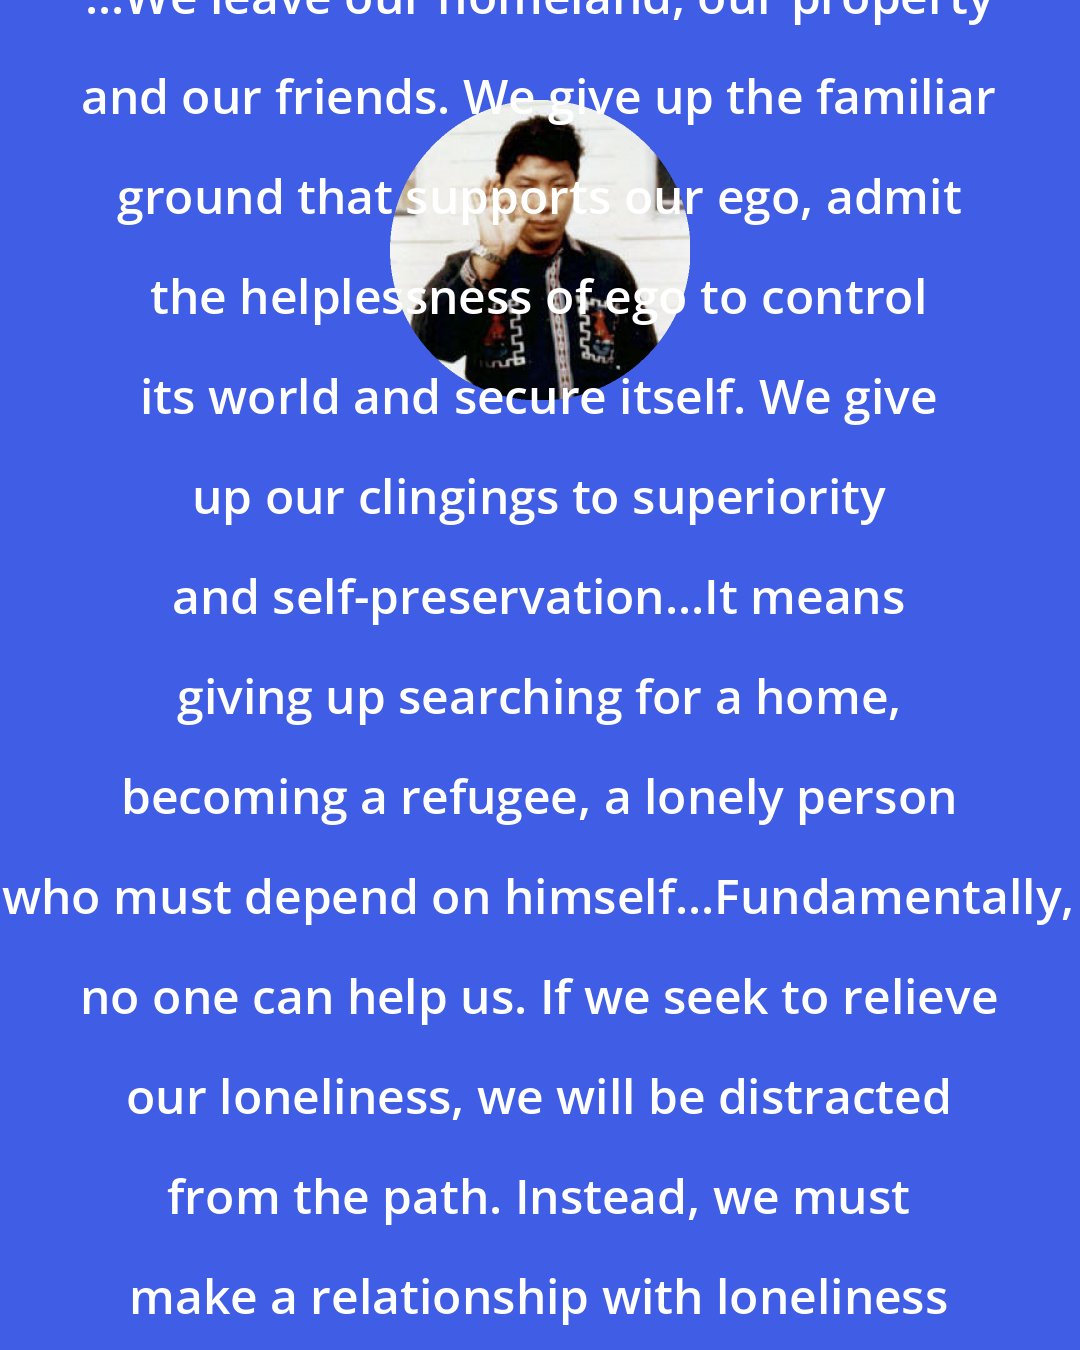 Chogyam Trungpa: ...We leave our homeland, our property and our friends. We give up the familiar ground that supports our ego, admit the helplessness of ego to control its world and secure itself. We give up our clingings to superiority and self-preservation...It means giving up searching for a home, becoming a refugee, a lonely person who must depend on himself...Fundamentally, no one can help us. If we seek to relieve our loneliness, we will be distracted from the path. Instead, we must make a relationship with loneliness until it becomes aloneness.